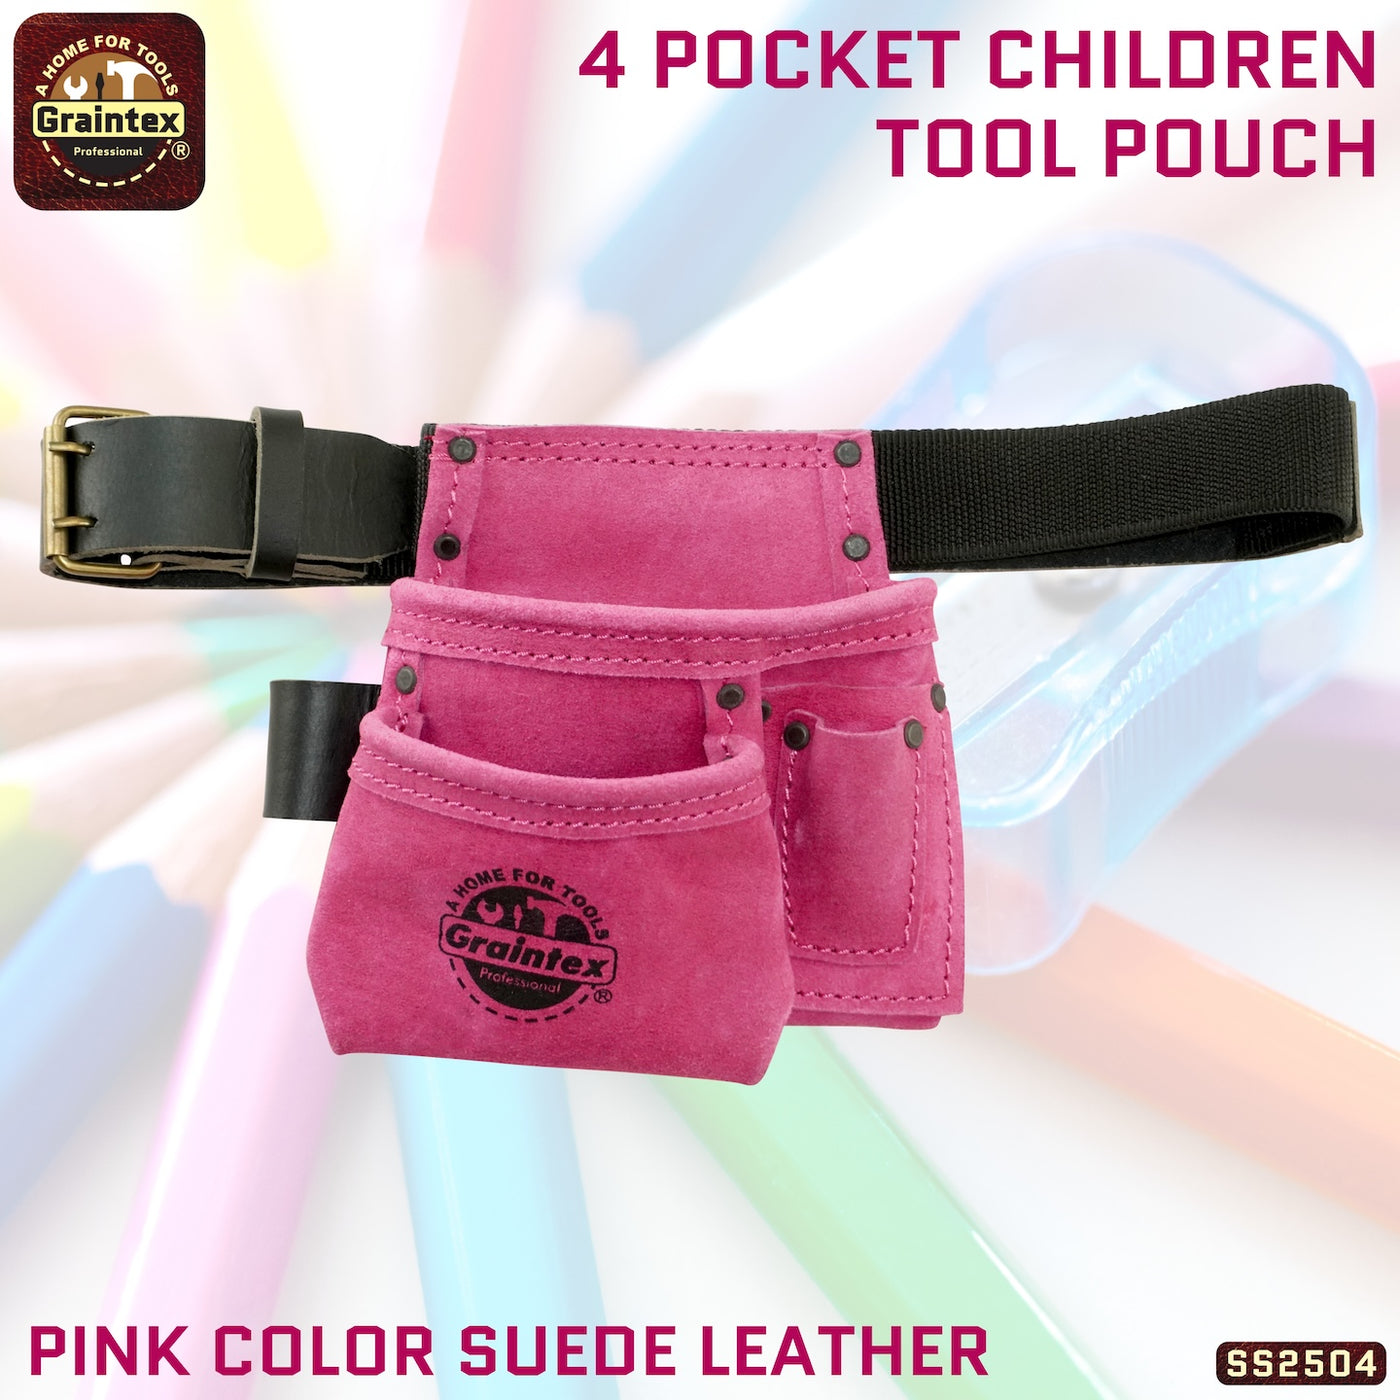 SS2504 :: 4 Pocket Children Tool Pouch Pink Color Suede Leather